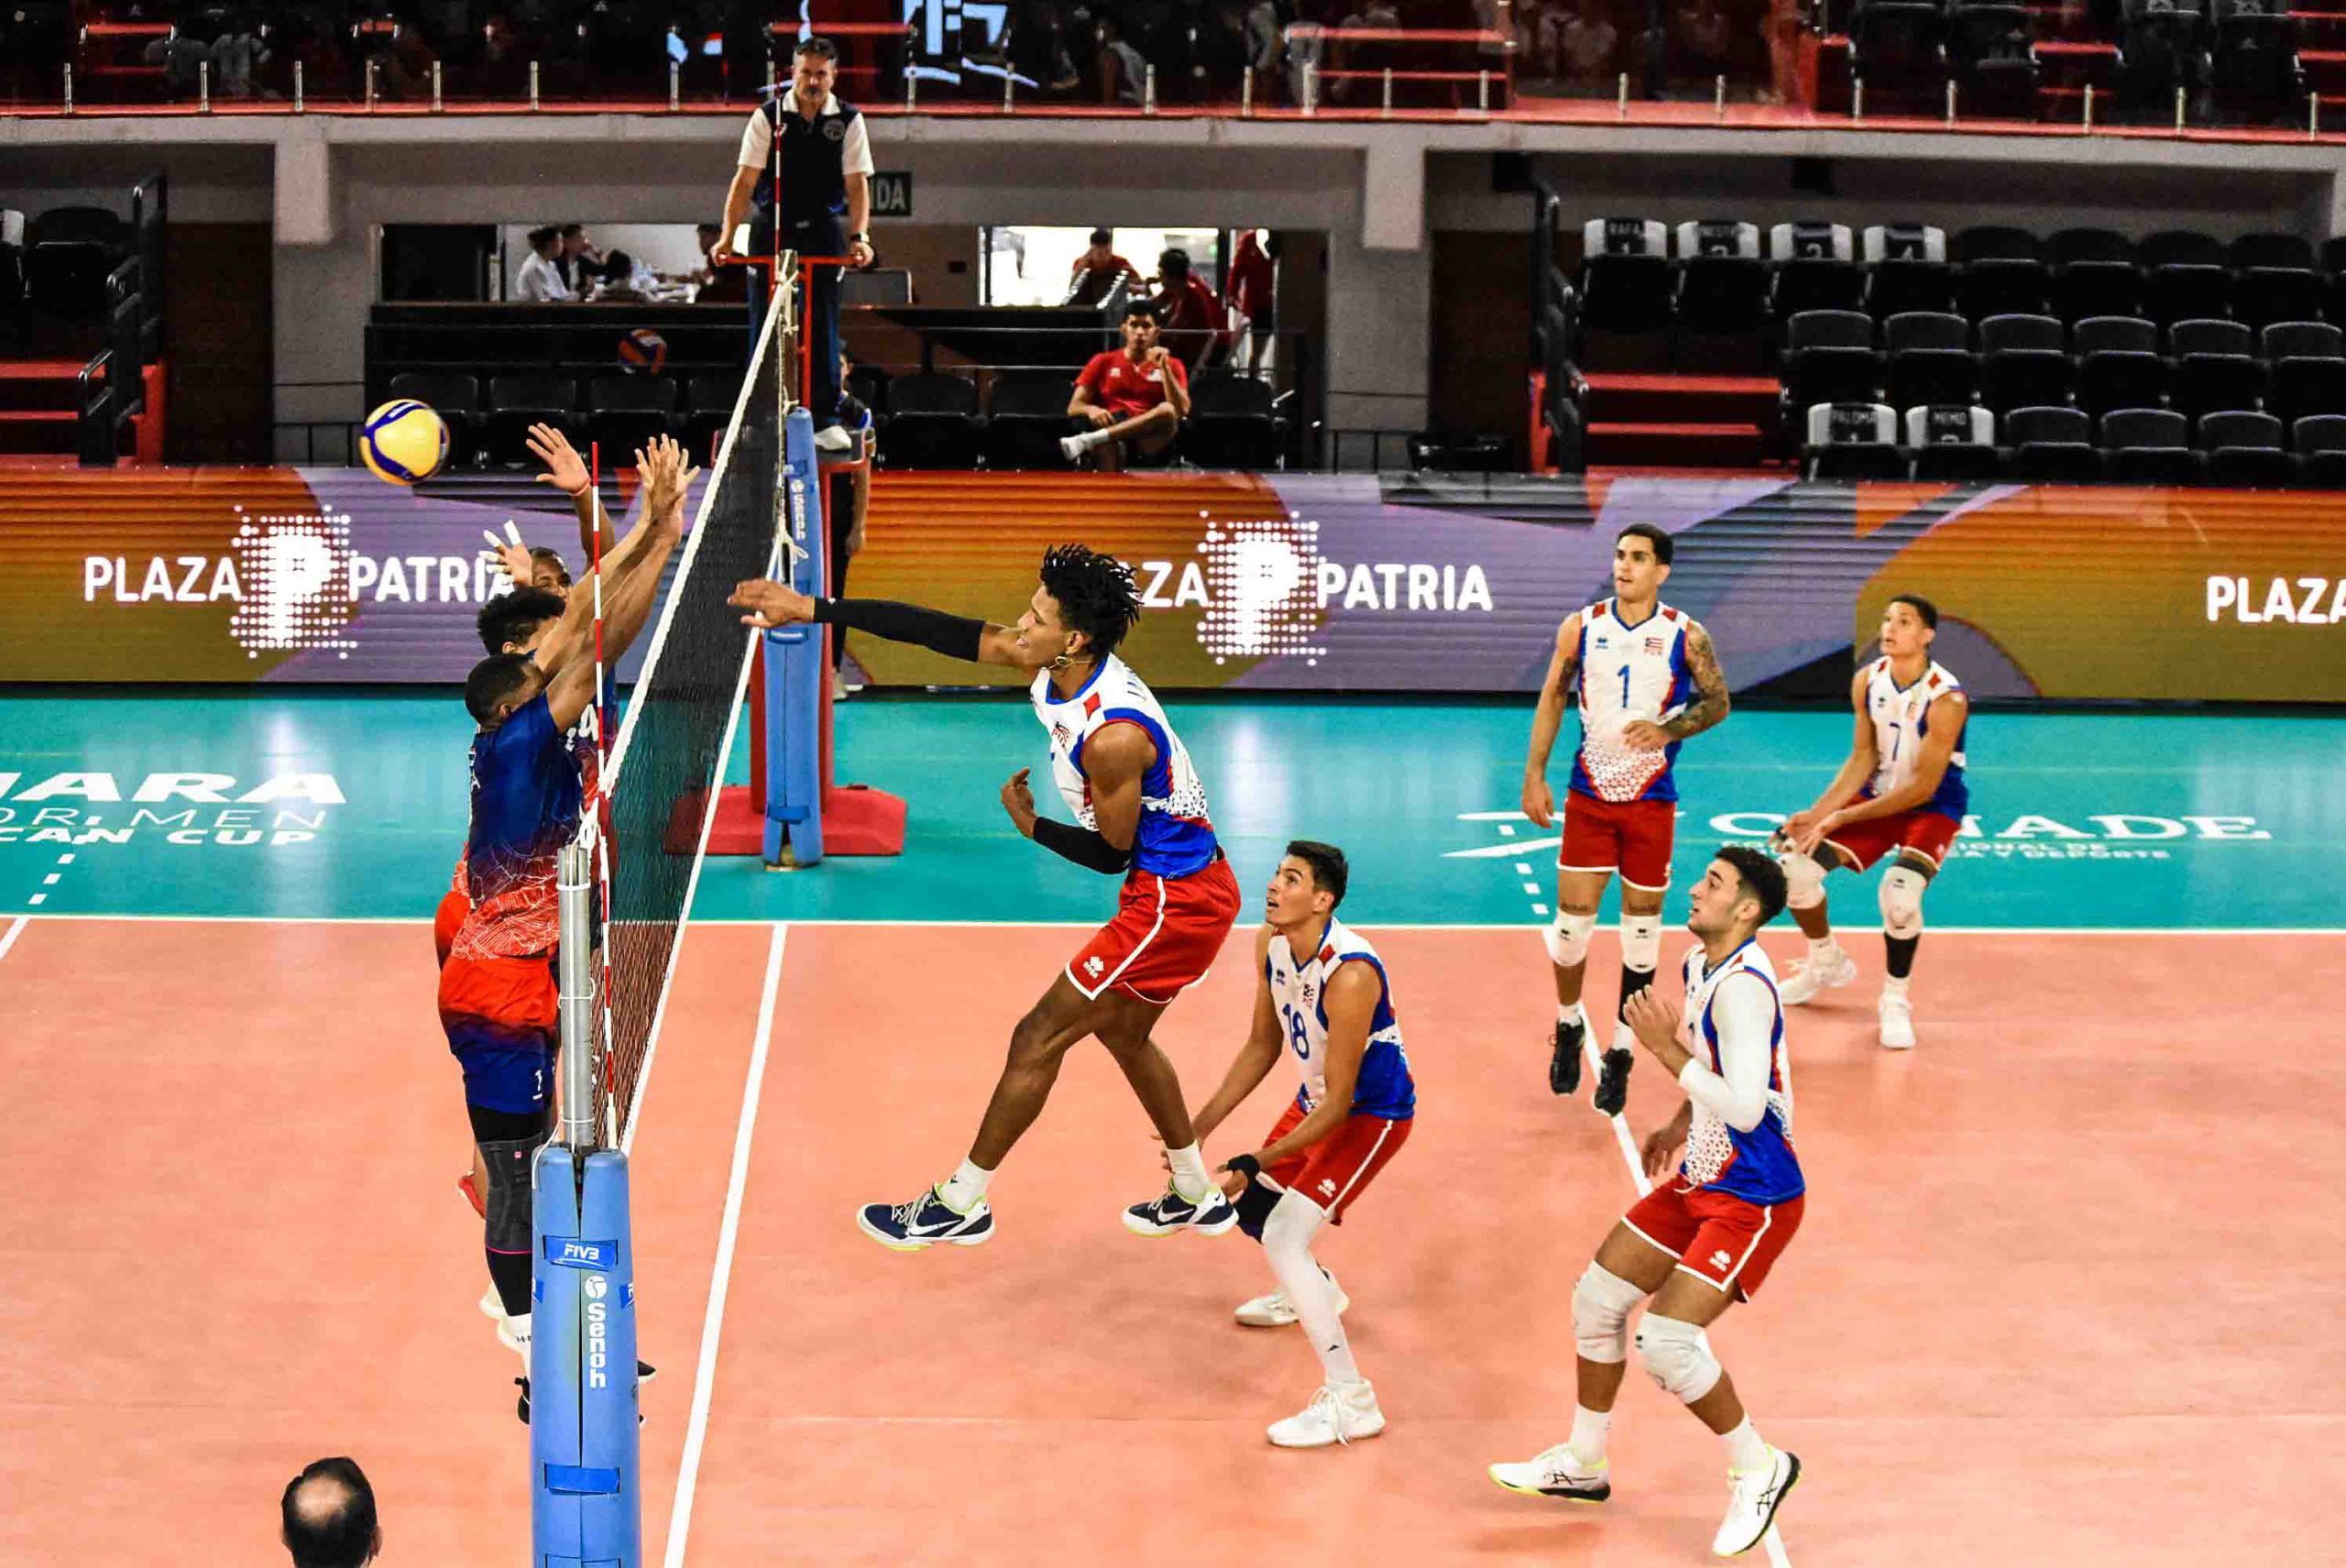 Puerto Rico defeats Dominican Republic for ninth place